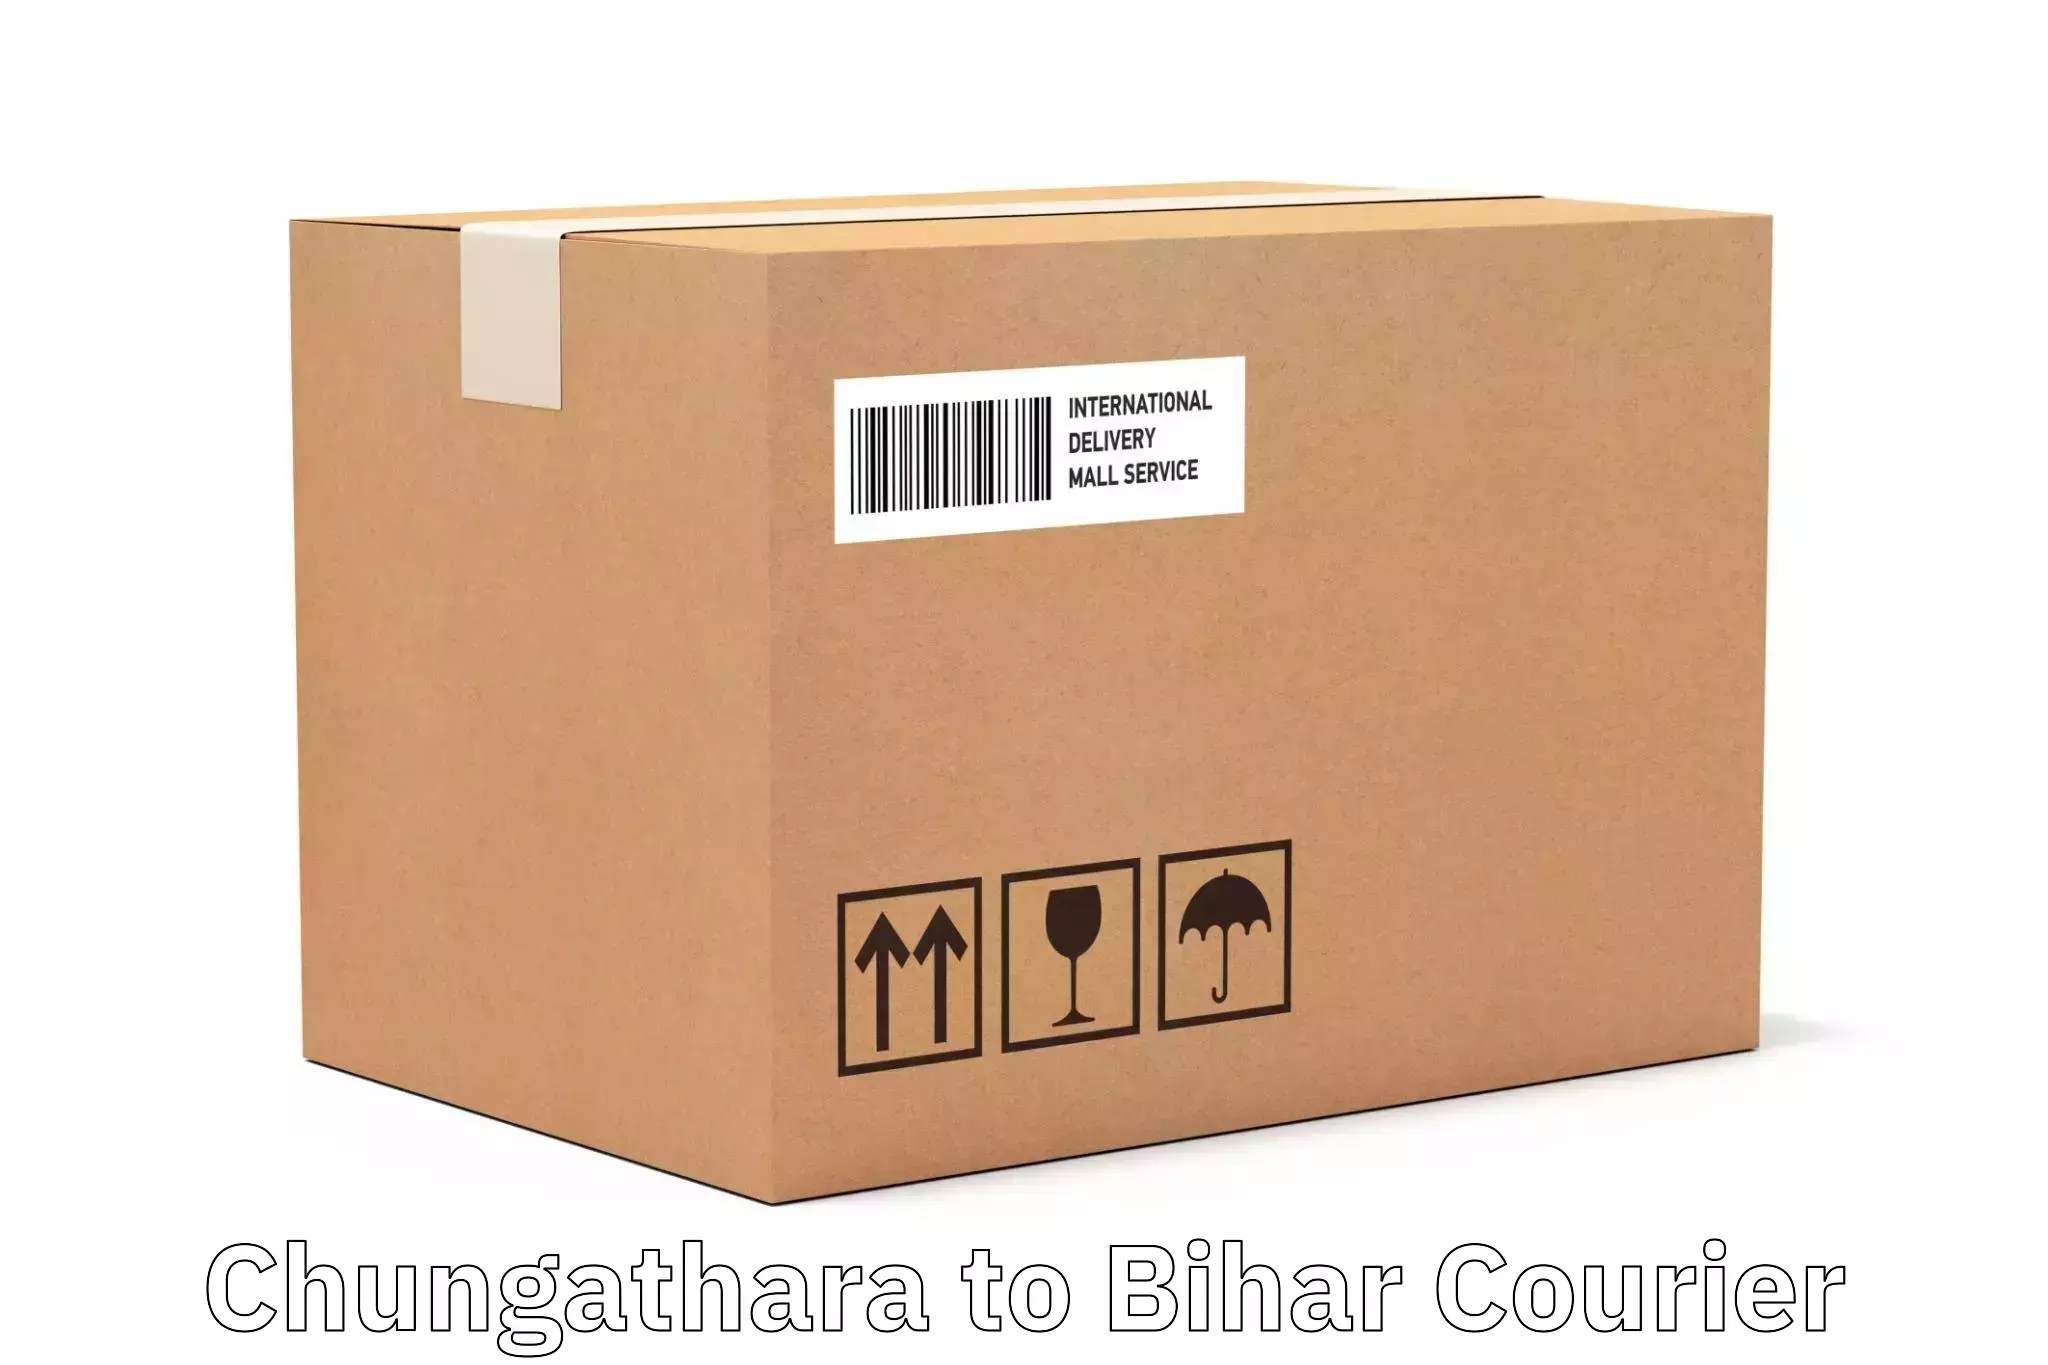 Quality courier services in Chungathara to Alamnagar